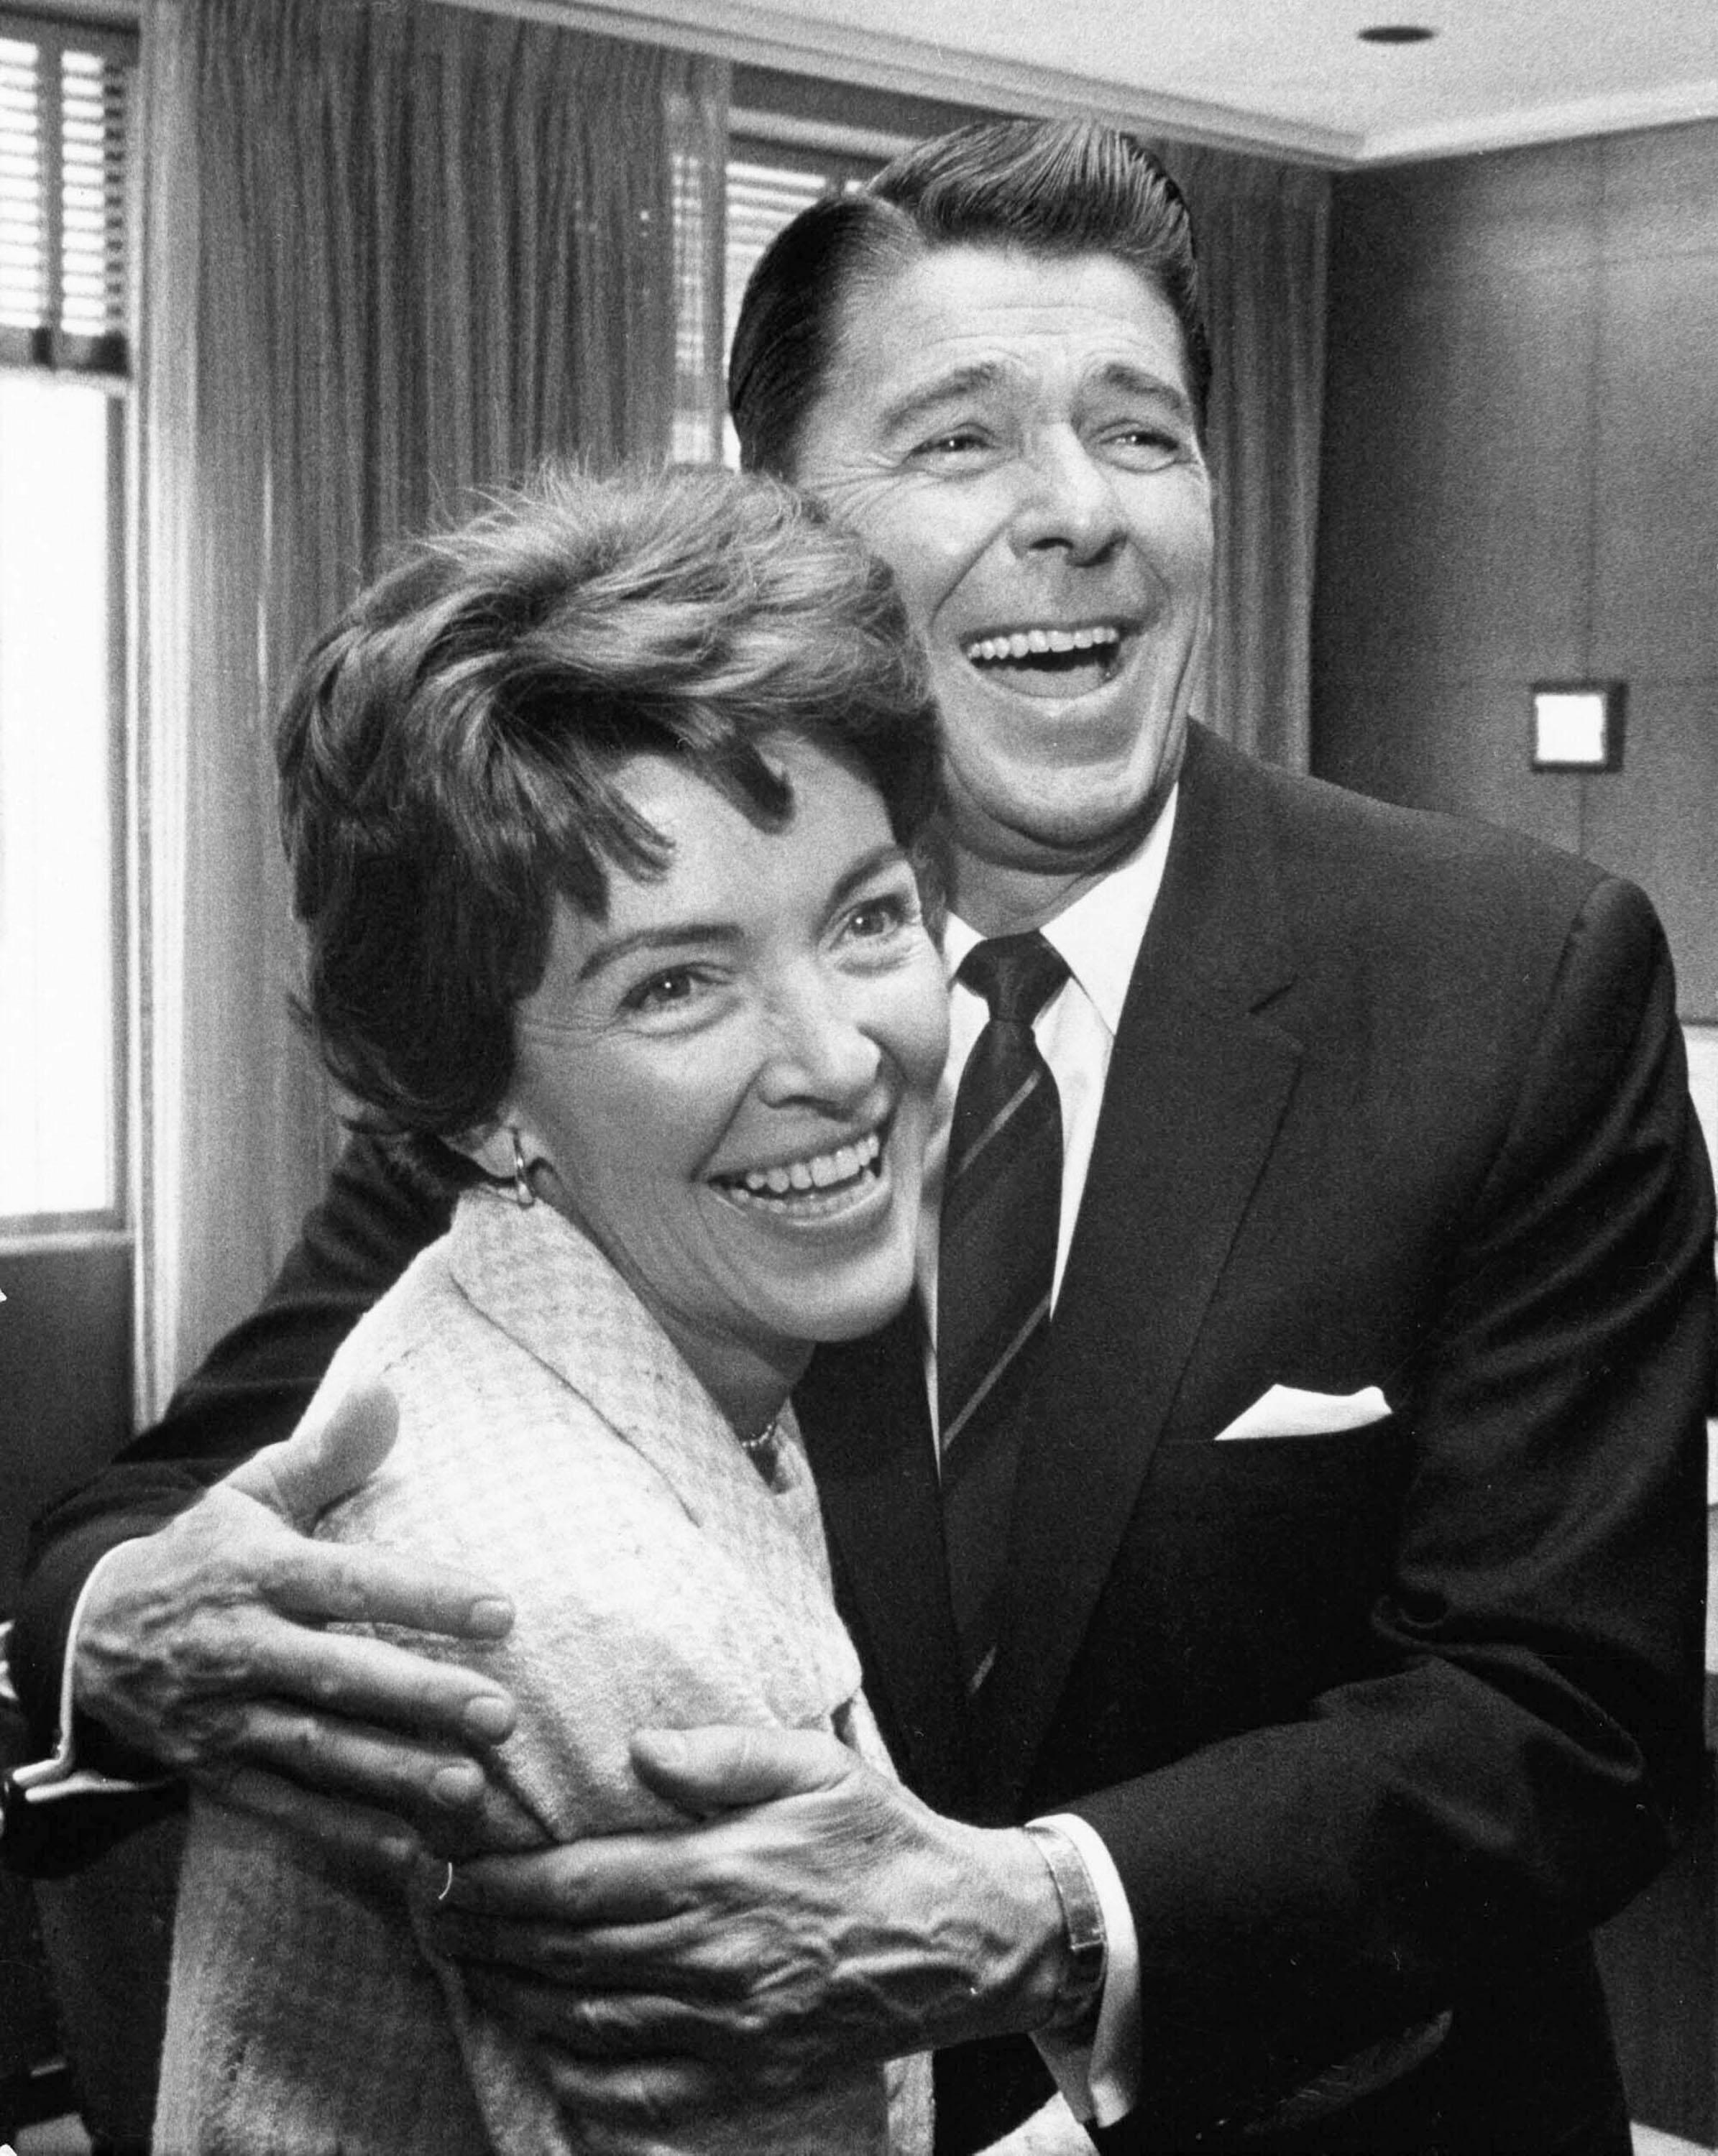 Nancy Reagan history the real story of her time in Hollywood. image